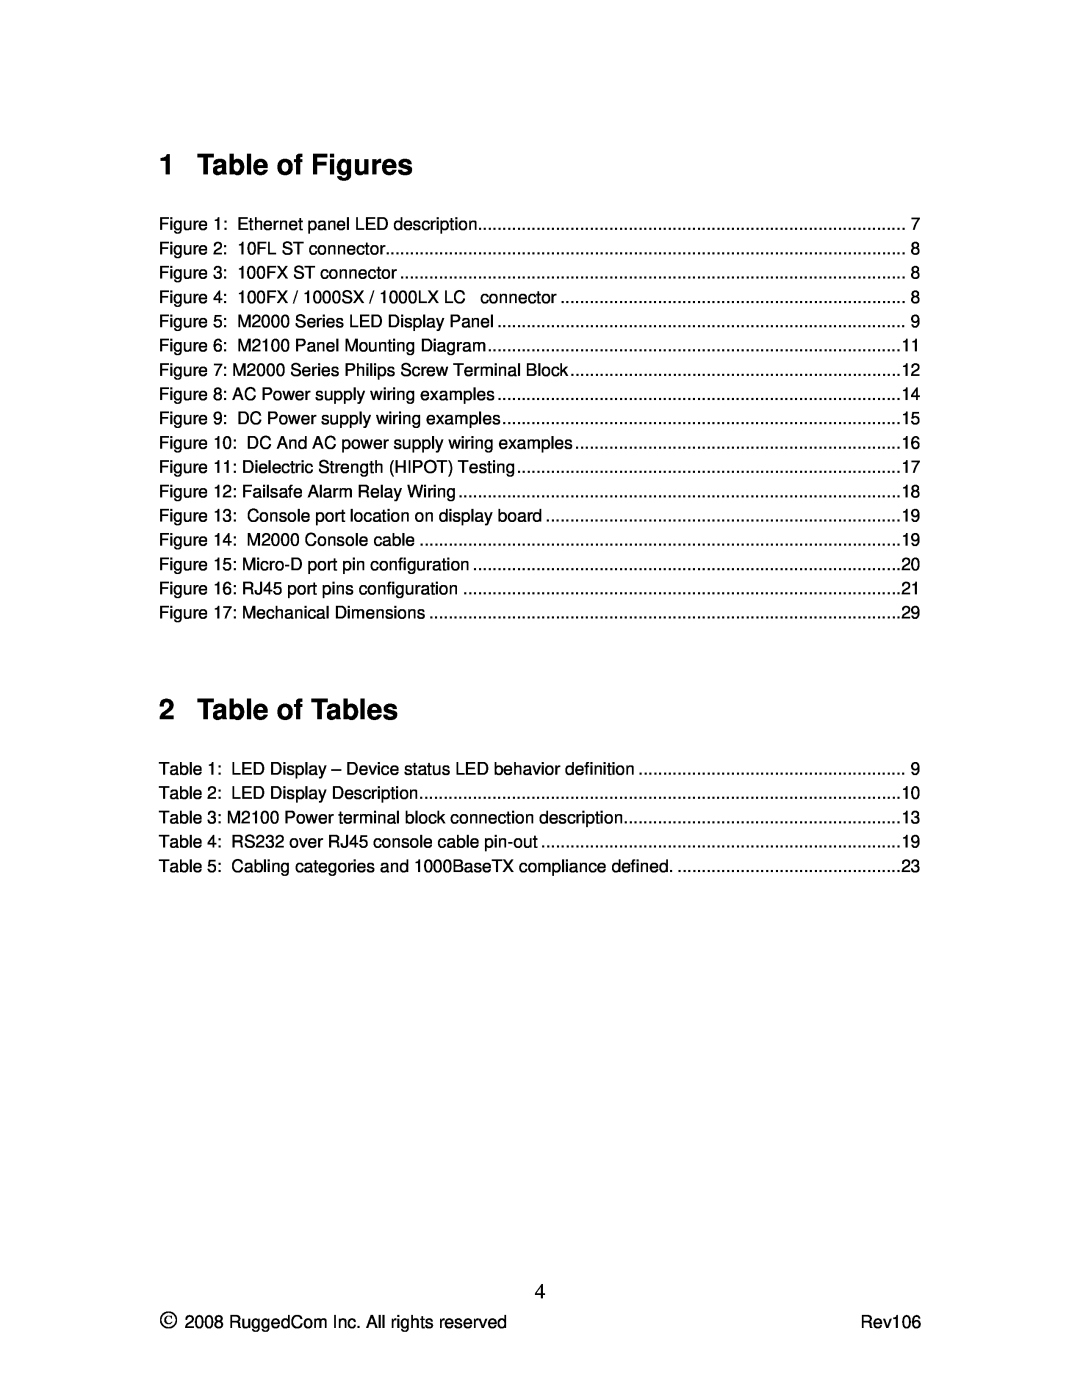 RuggedCom M2100 manual Table of Figures, Table of Tables 